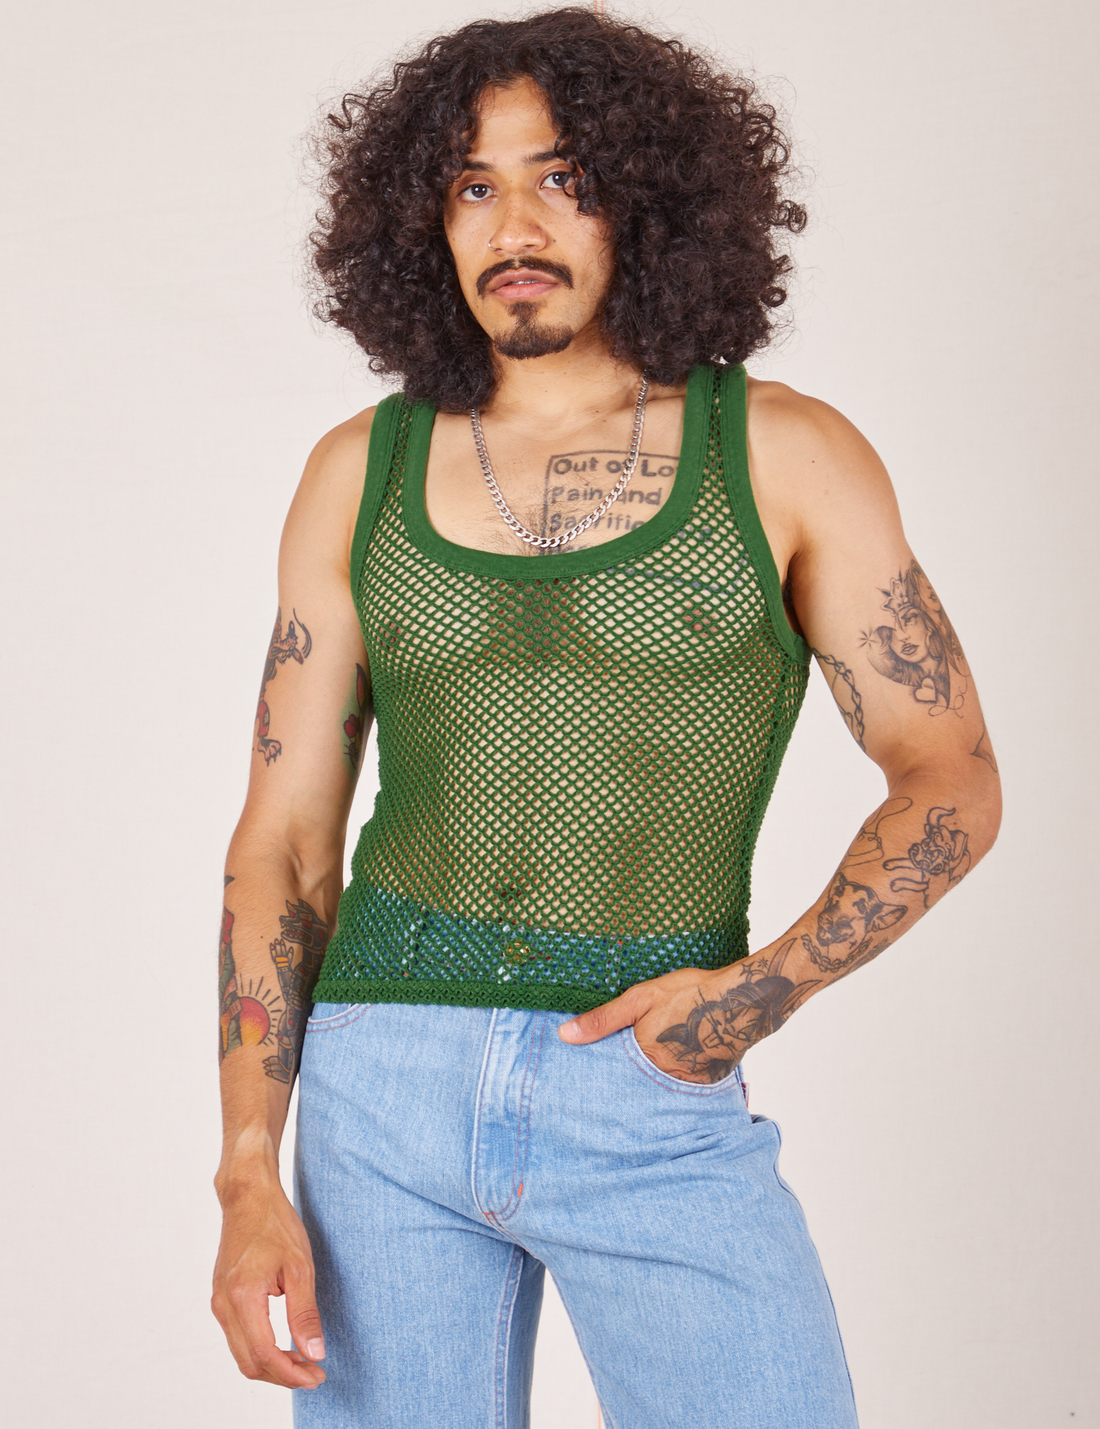 Jesse is 5'8" and wearing XS Mesh Tank Top in Lawn Green